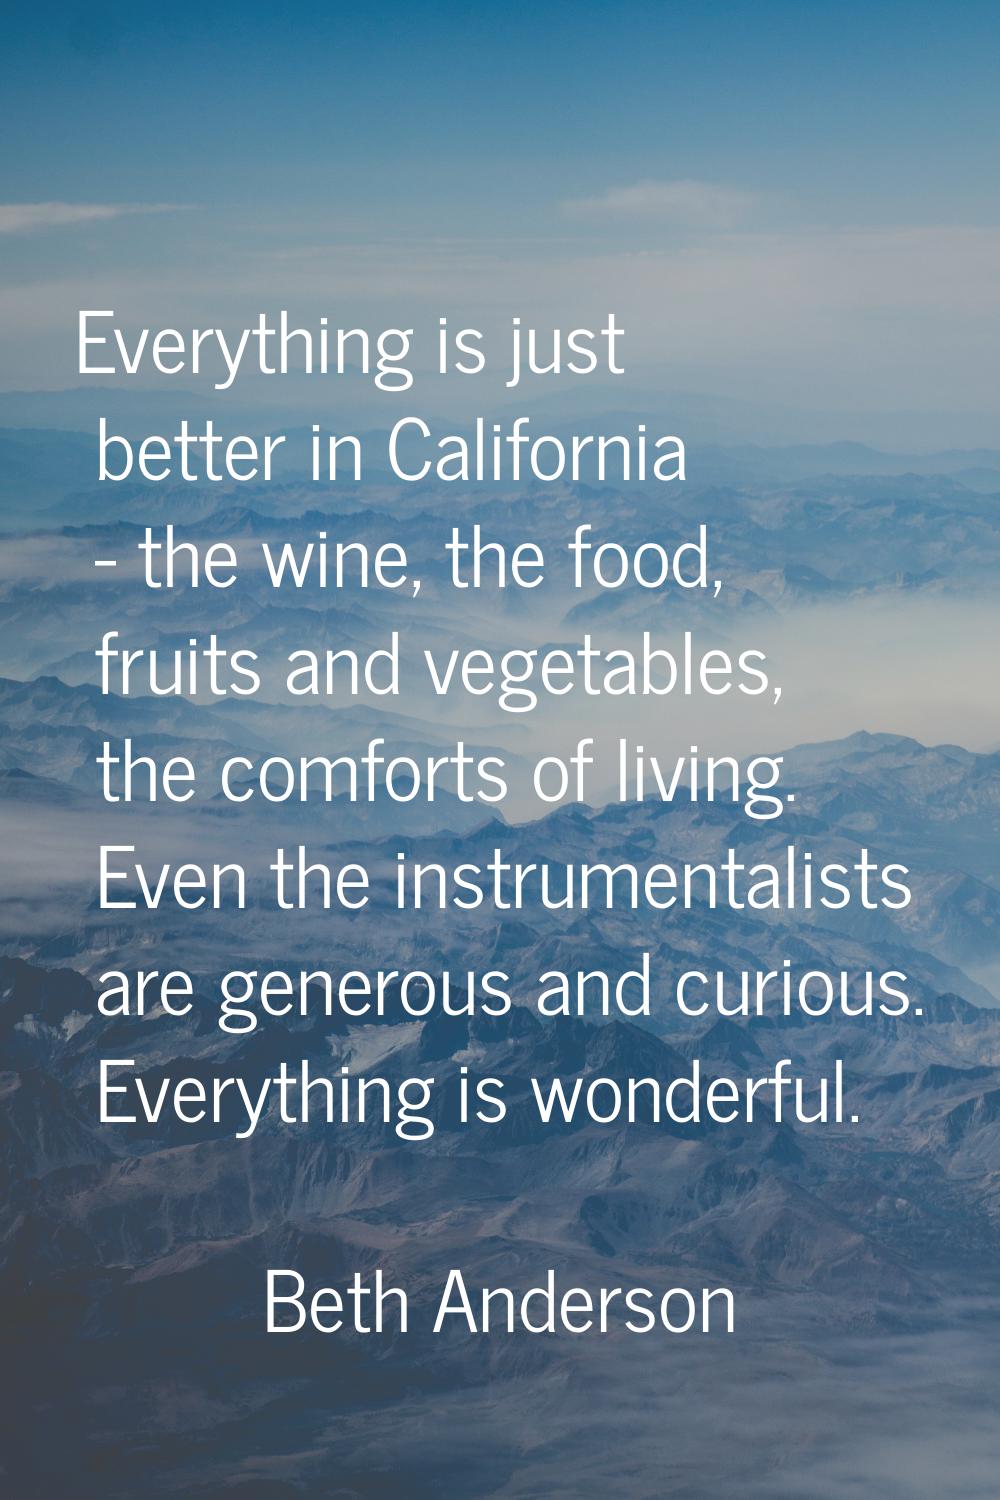 Everything is just better in California - the wine, the food, fruits and vegetables, the comforts o